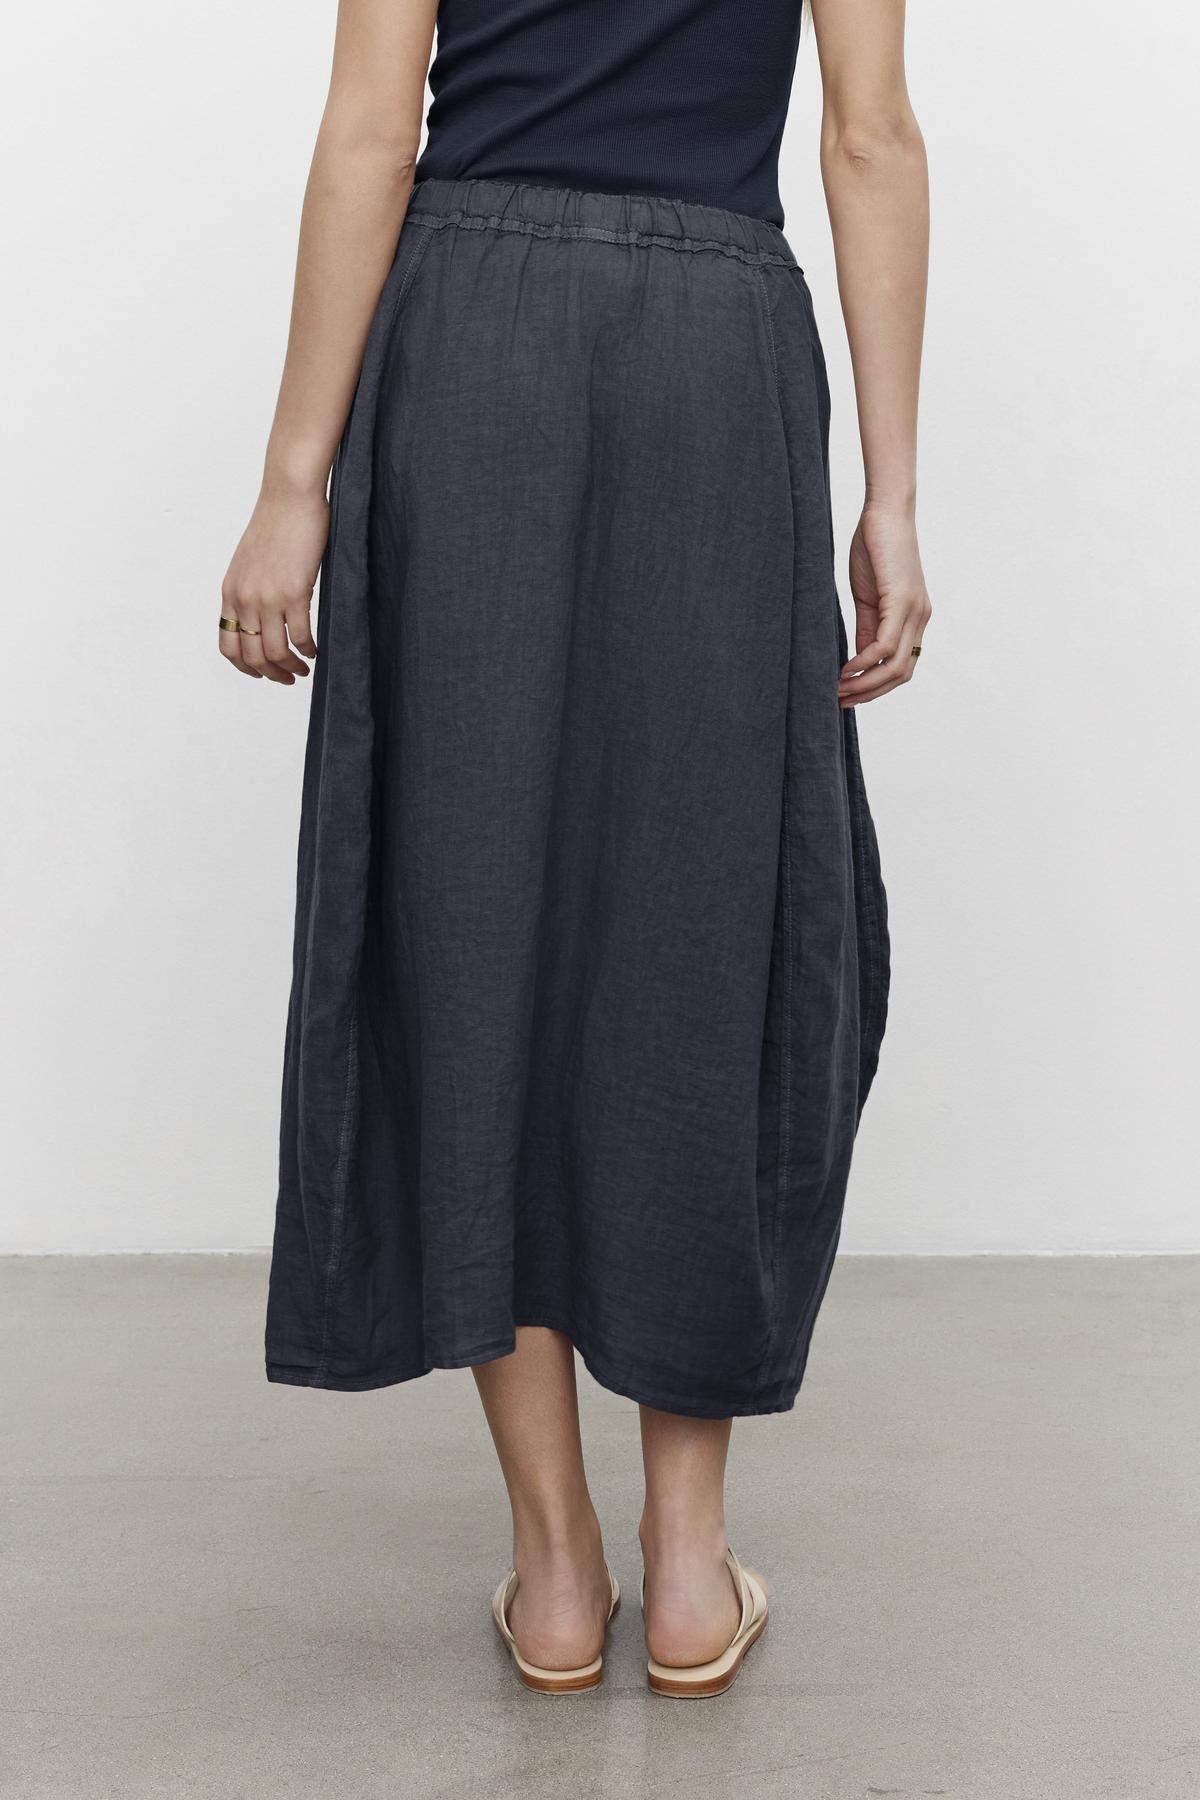   Woman viewed from behind wearing a dark gray FAE LINEN A-LINE SKIRT and light beige shoes, standing against a plain background by Velvet by Graham & Spencer. 